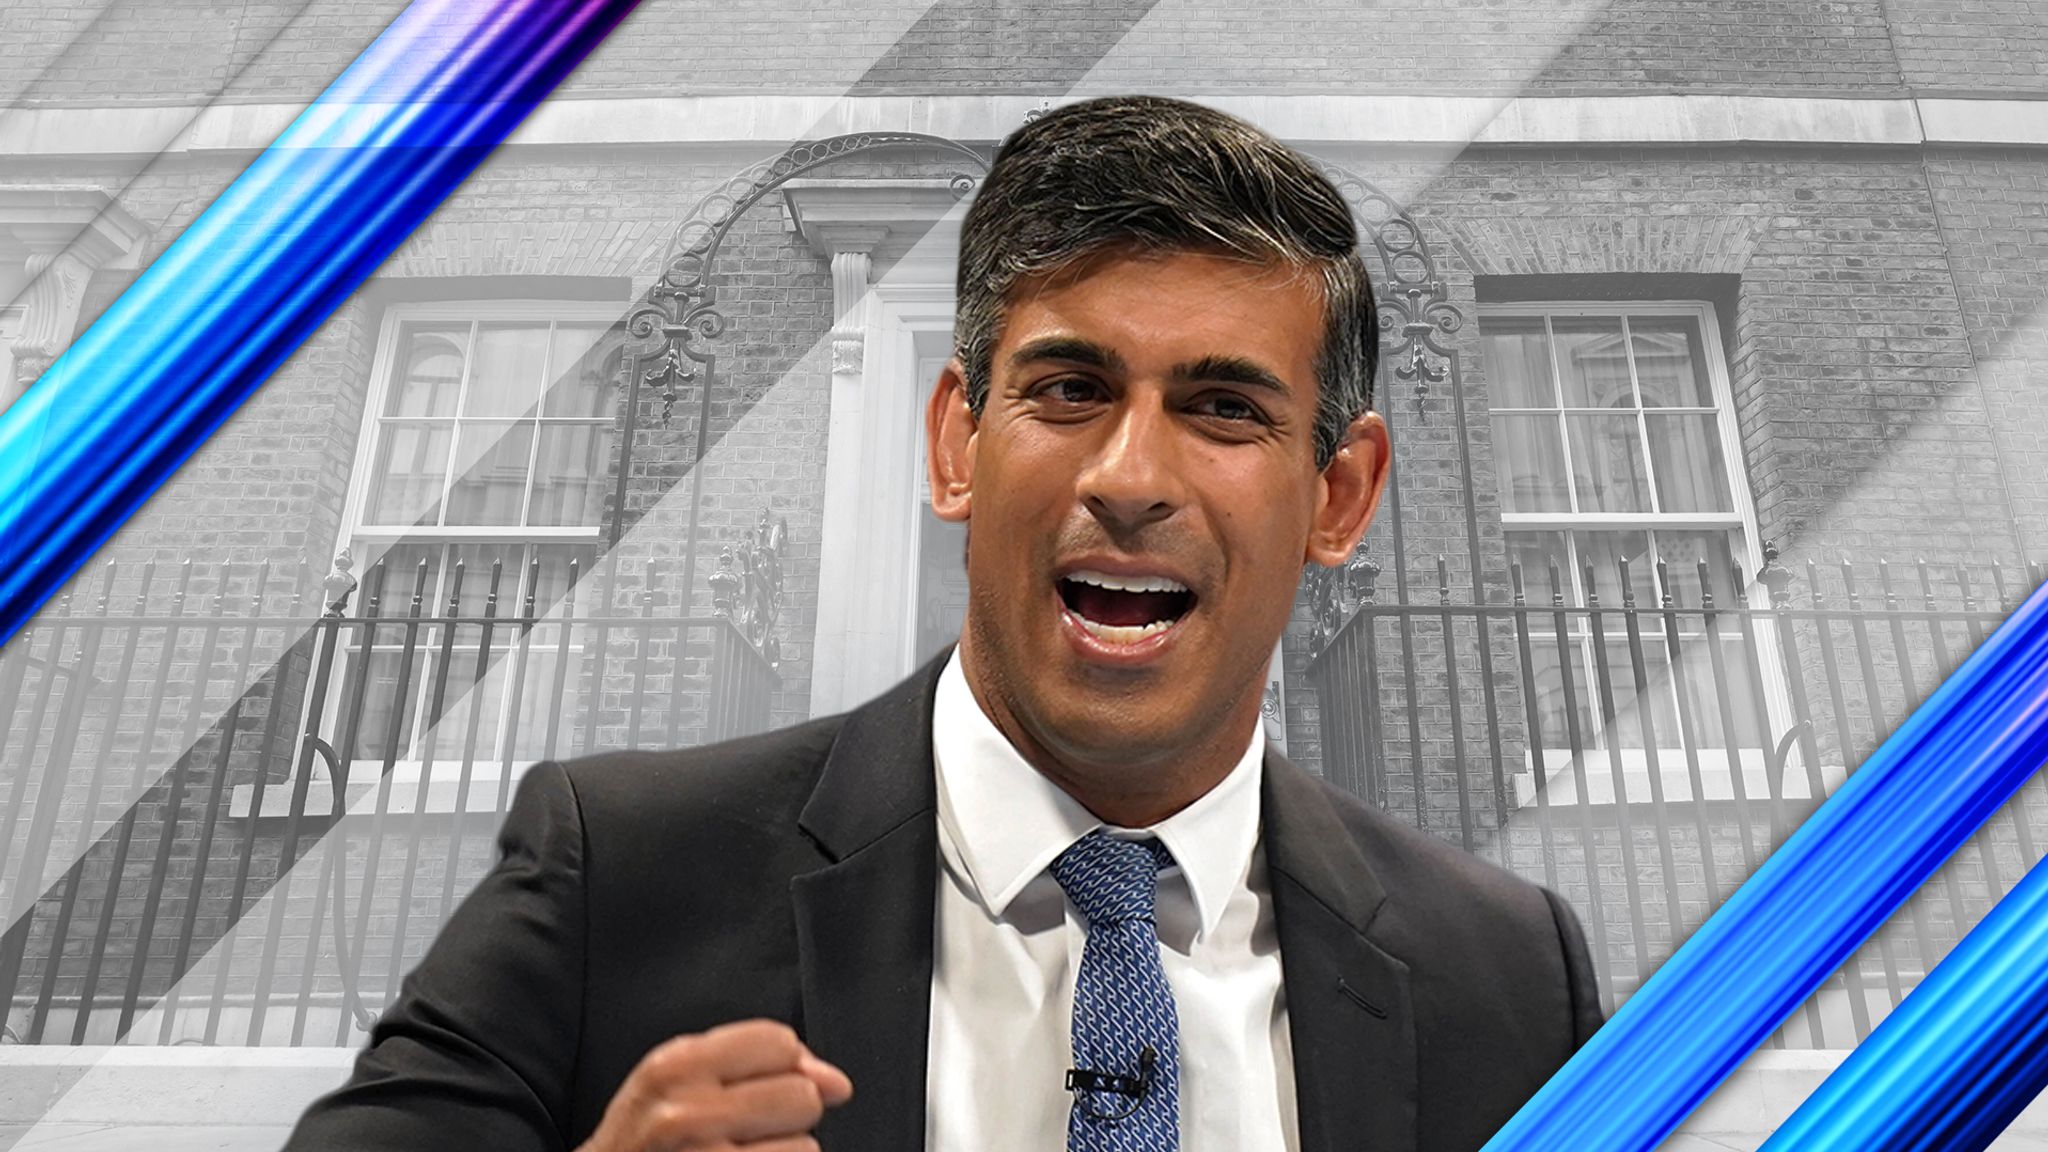 Indian immigrant becomes UK prime minister. Is Canada next? 